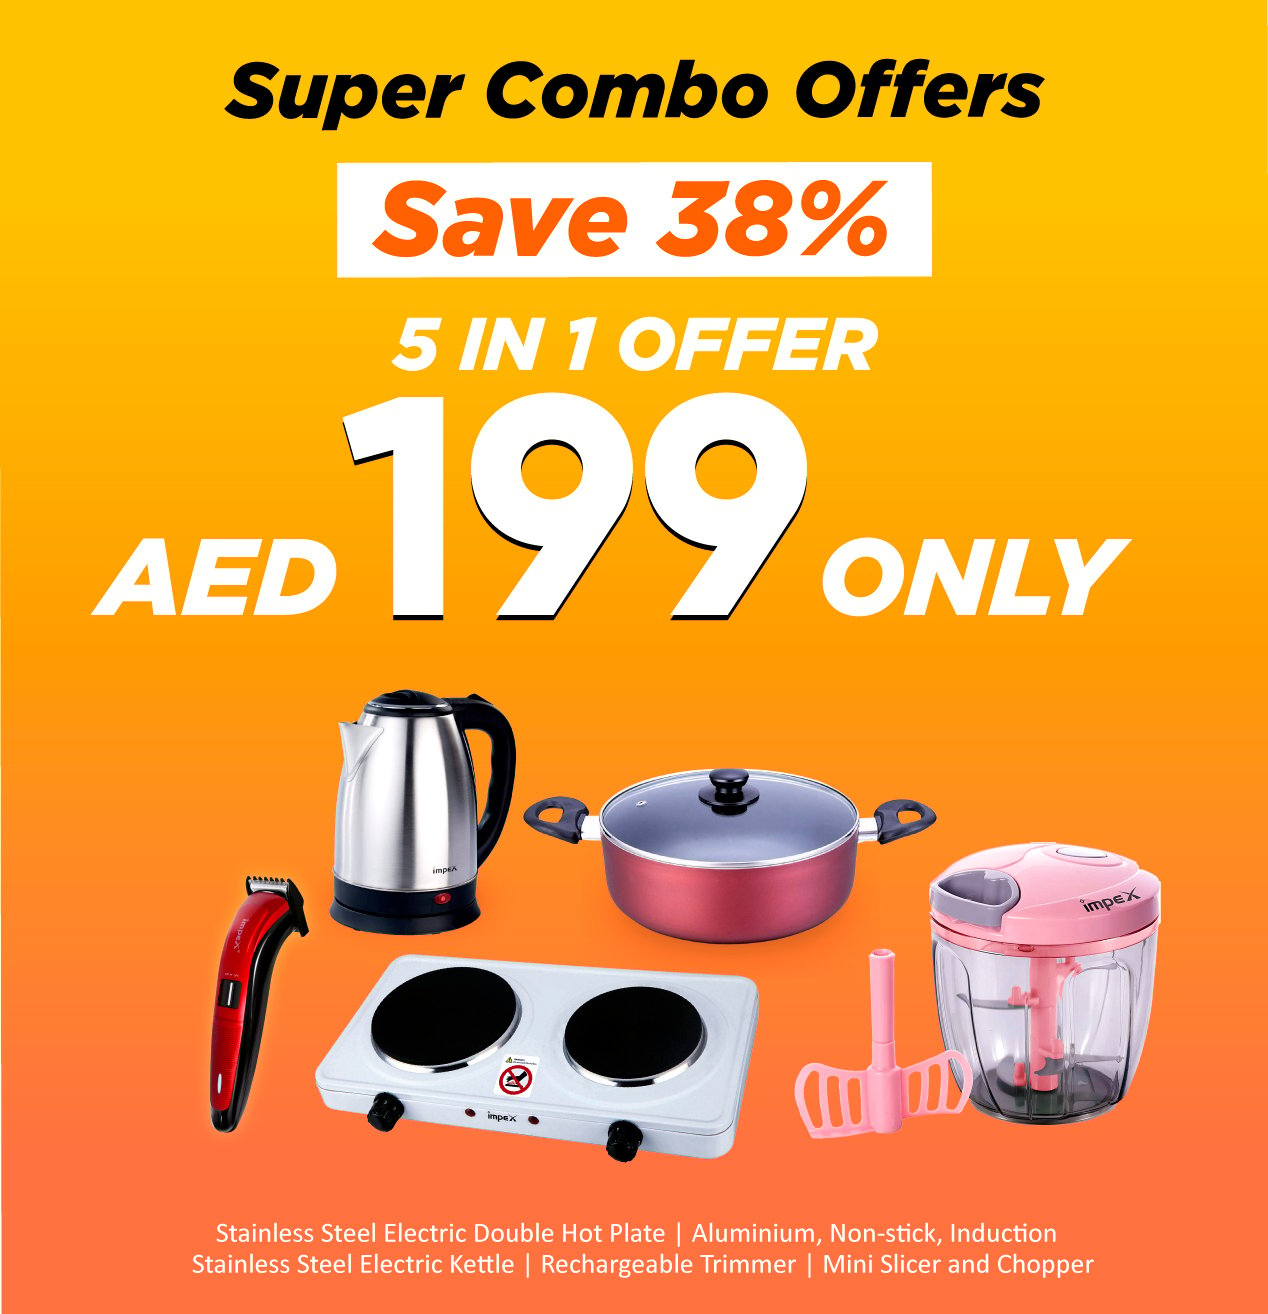 5 in 1 Best Combo Offer - Stainless Steel Electric Double Hot Plate + Aluminium, Non-stick, Induction + Stainless Steel Electric Kettle + Rechargeable Trimmer + Mini Slicer and Chopper